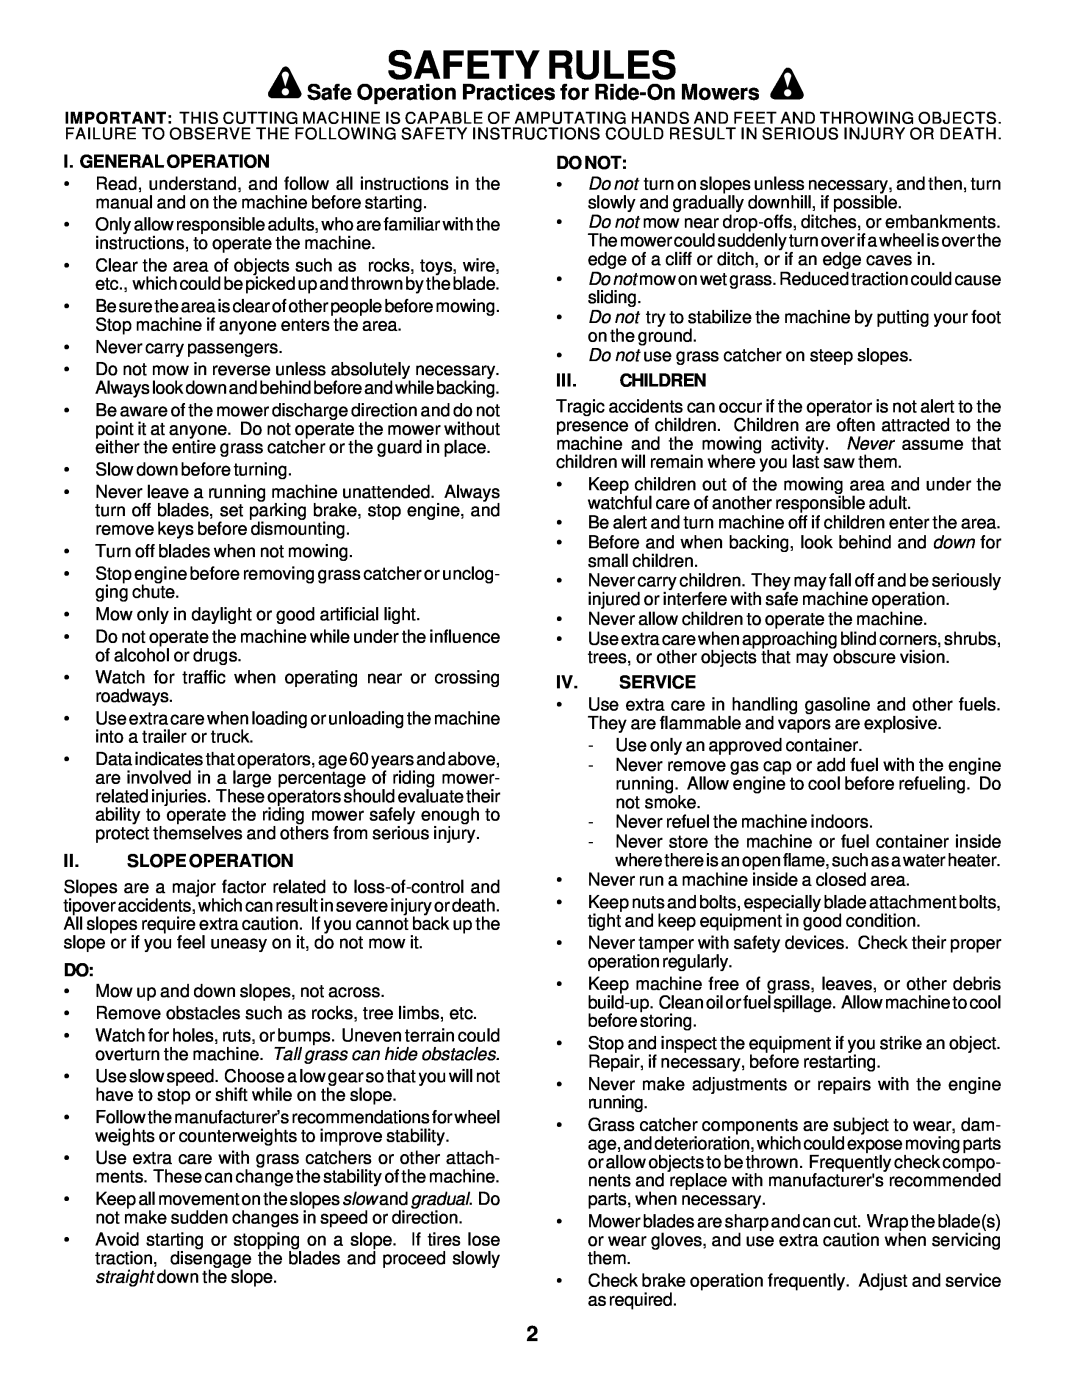 Poulan PRK17H42STB owner manual Safety Rules, Safe Operation Practices for Ride-OnMowers 